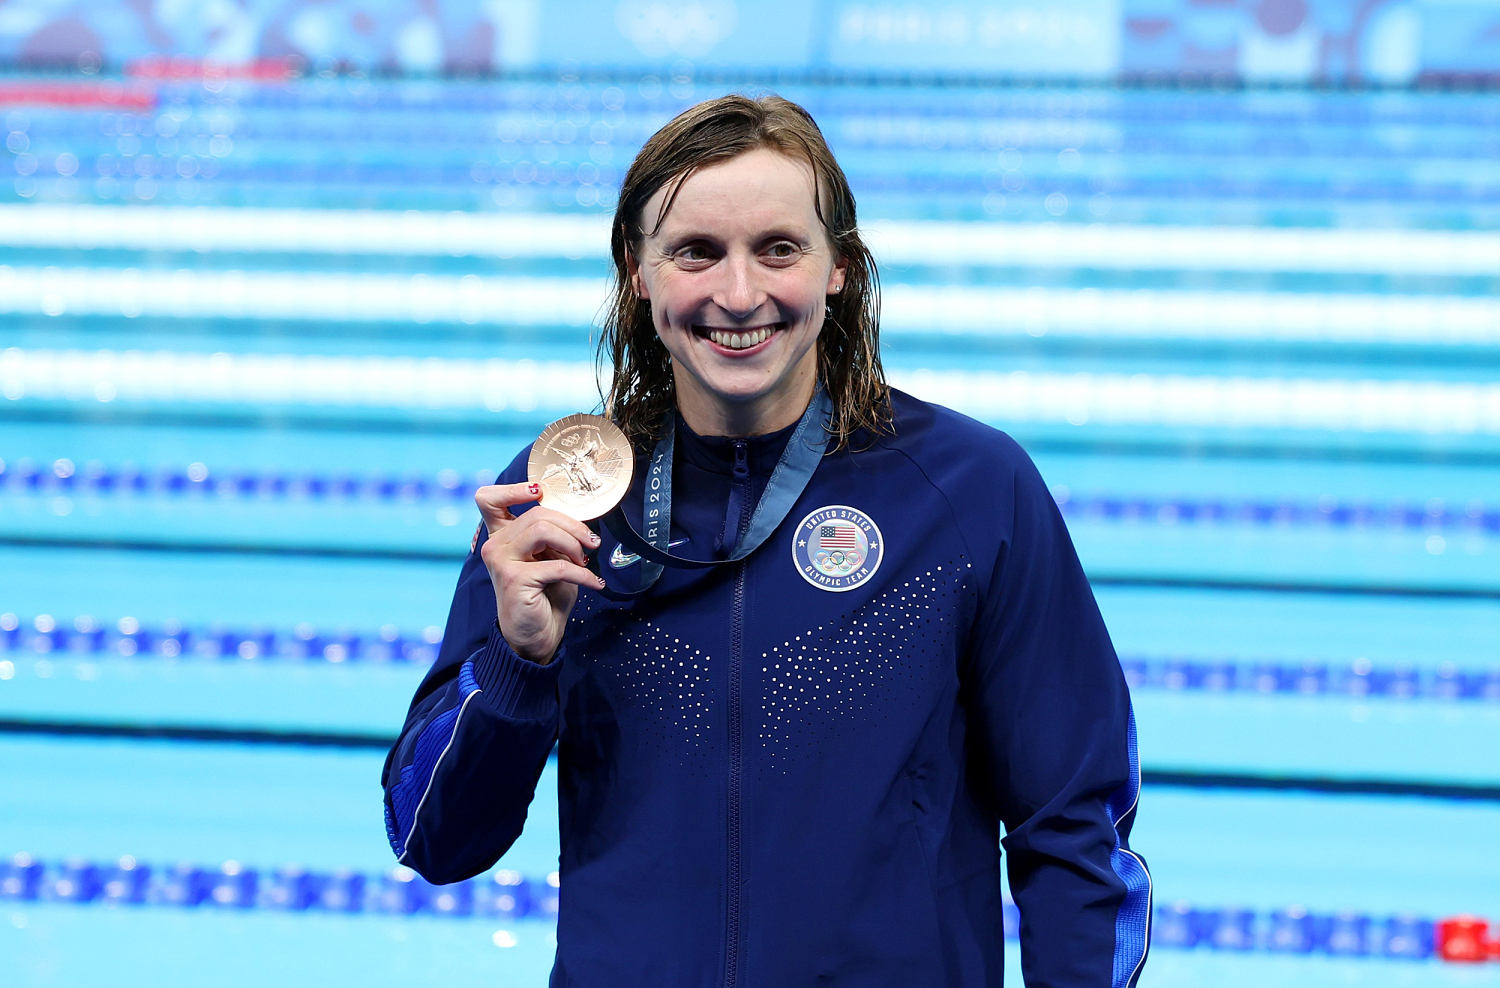 Katie Ledecky wins 1,500 free, tying Jenny Thompson's record for most gold medals by a female swimmer